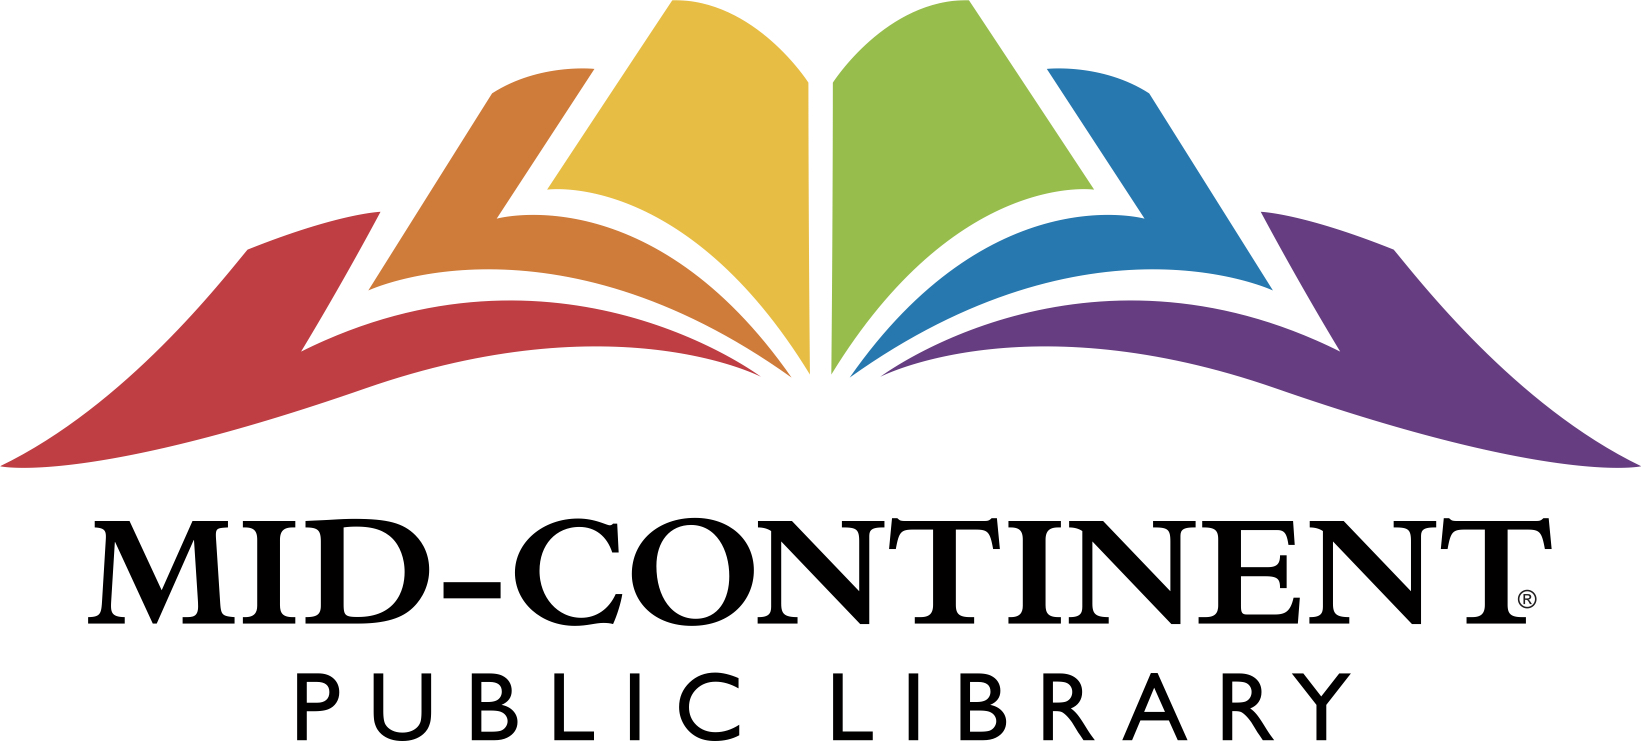 Story Center | Mid-Continent Public Library